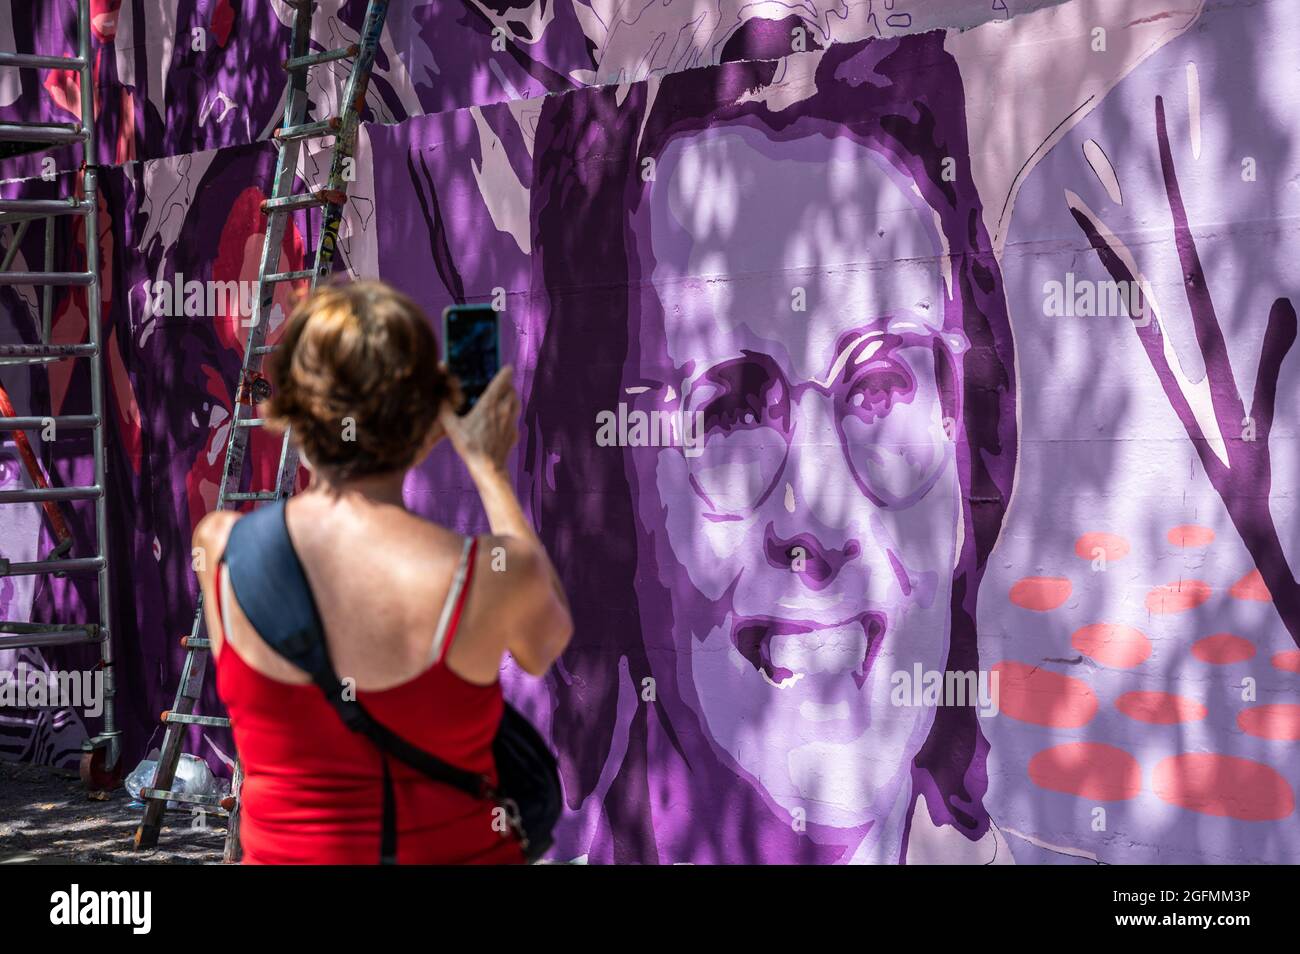 Madrid, Spain, 26/08/2021, A woman takes pictures to a feminist mural that is being repainted by members of UNLOGIC artistic group. The mural appeared vandalized during the past International Women's Day and represents famous women from around the world, with the faces of 15 women who are part of history for their fight in favor of equality: Angela Davis, Frida Kahlo, Nina Simone, Rigoberta Menchu, Lucia Sanchez Saornil, Rosa Arauzo, Valentina Tereshkova, Chimamanda Ngozi, Emma Goldman, Kanno Sugato, Liudmila Pavlichenko, Billy Jean King, Gata Cattana, Rosa Parks, and Comandanta Ramona. Stock Photo